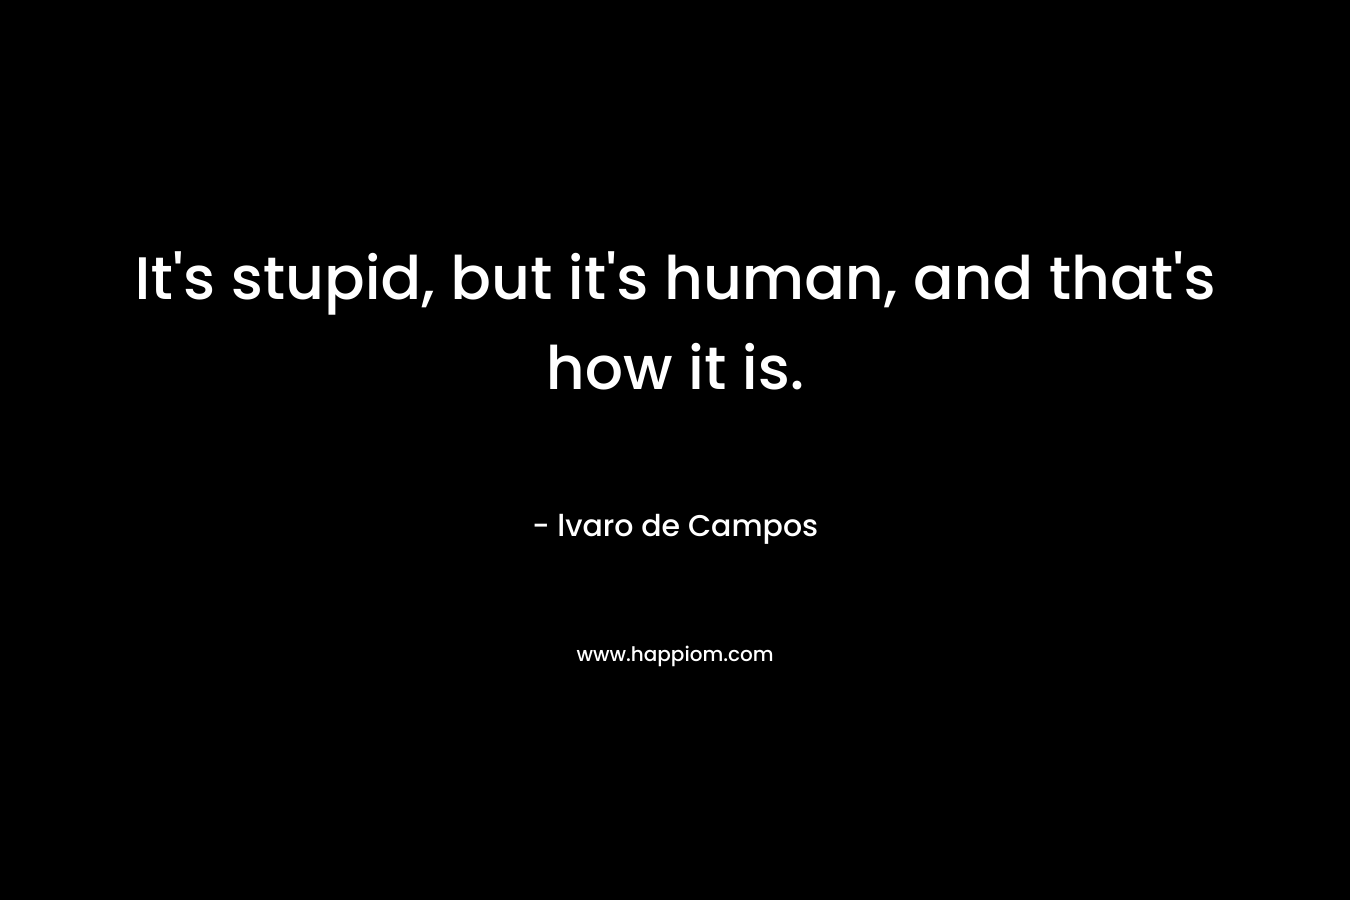 It’s stupid, but it’s human, and that’s how it is. – lvaro de Campos